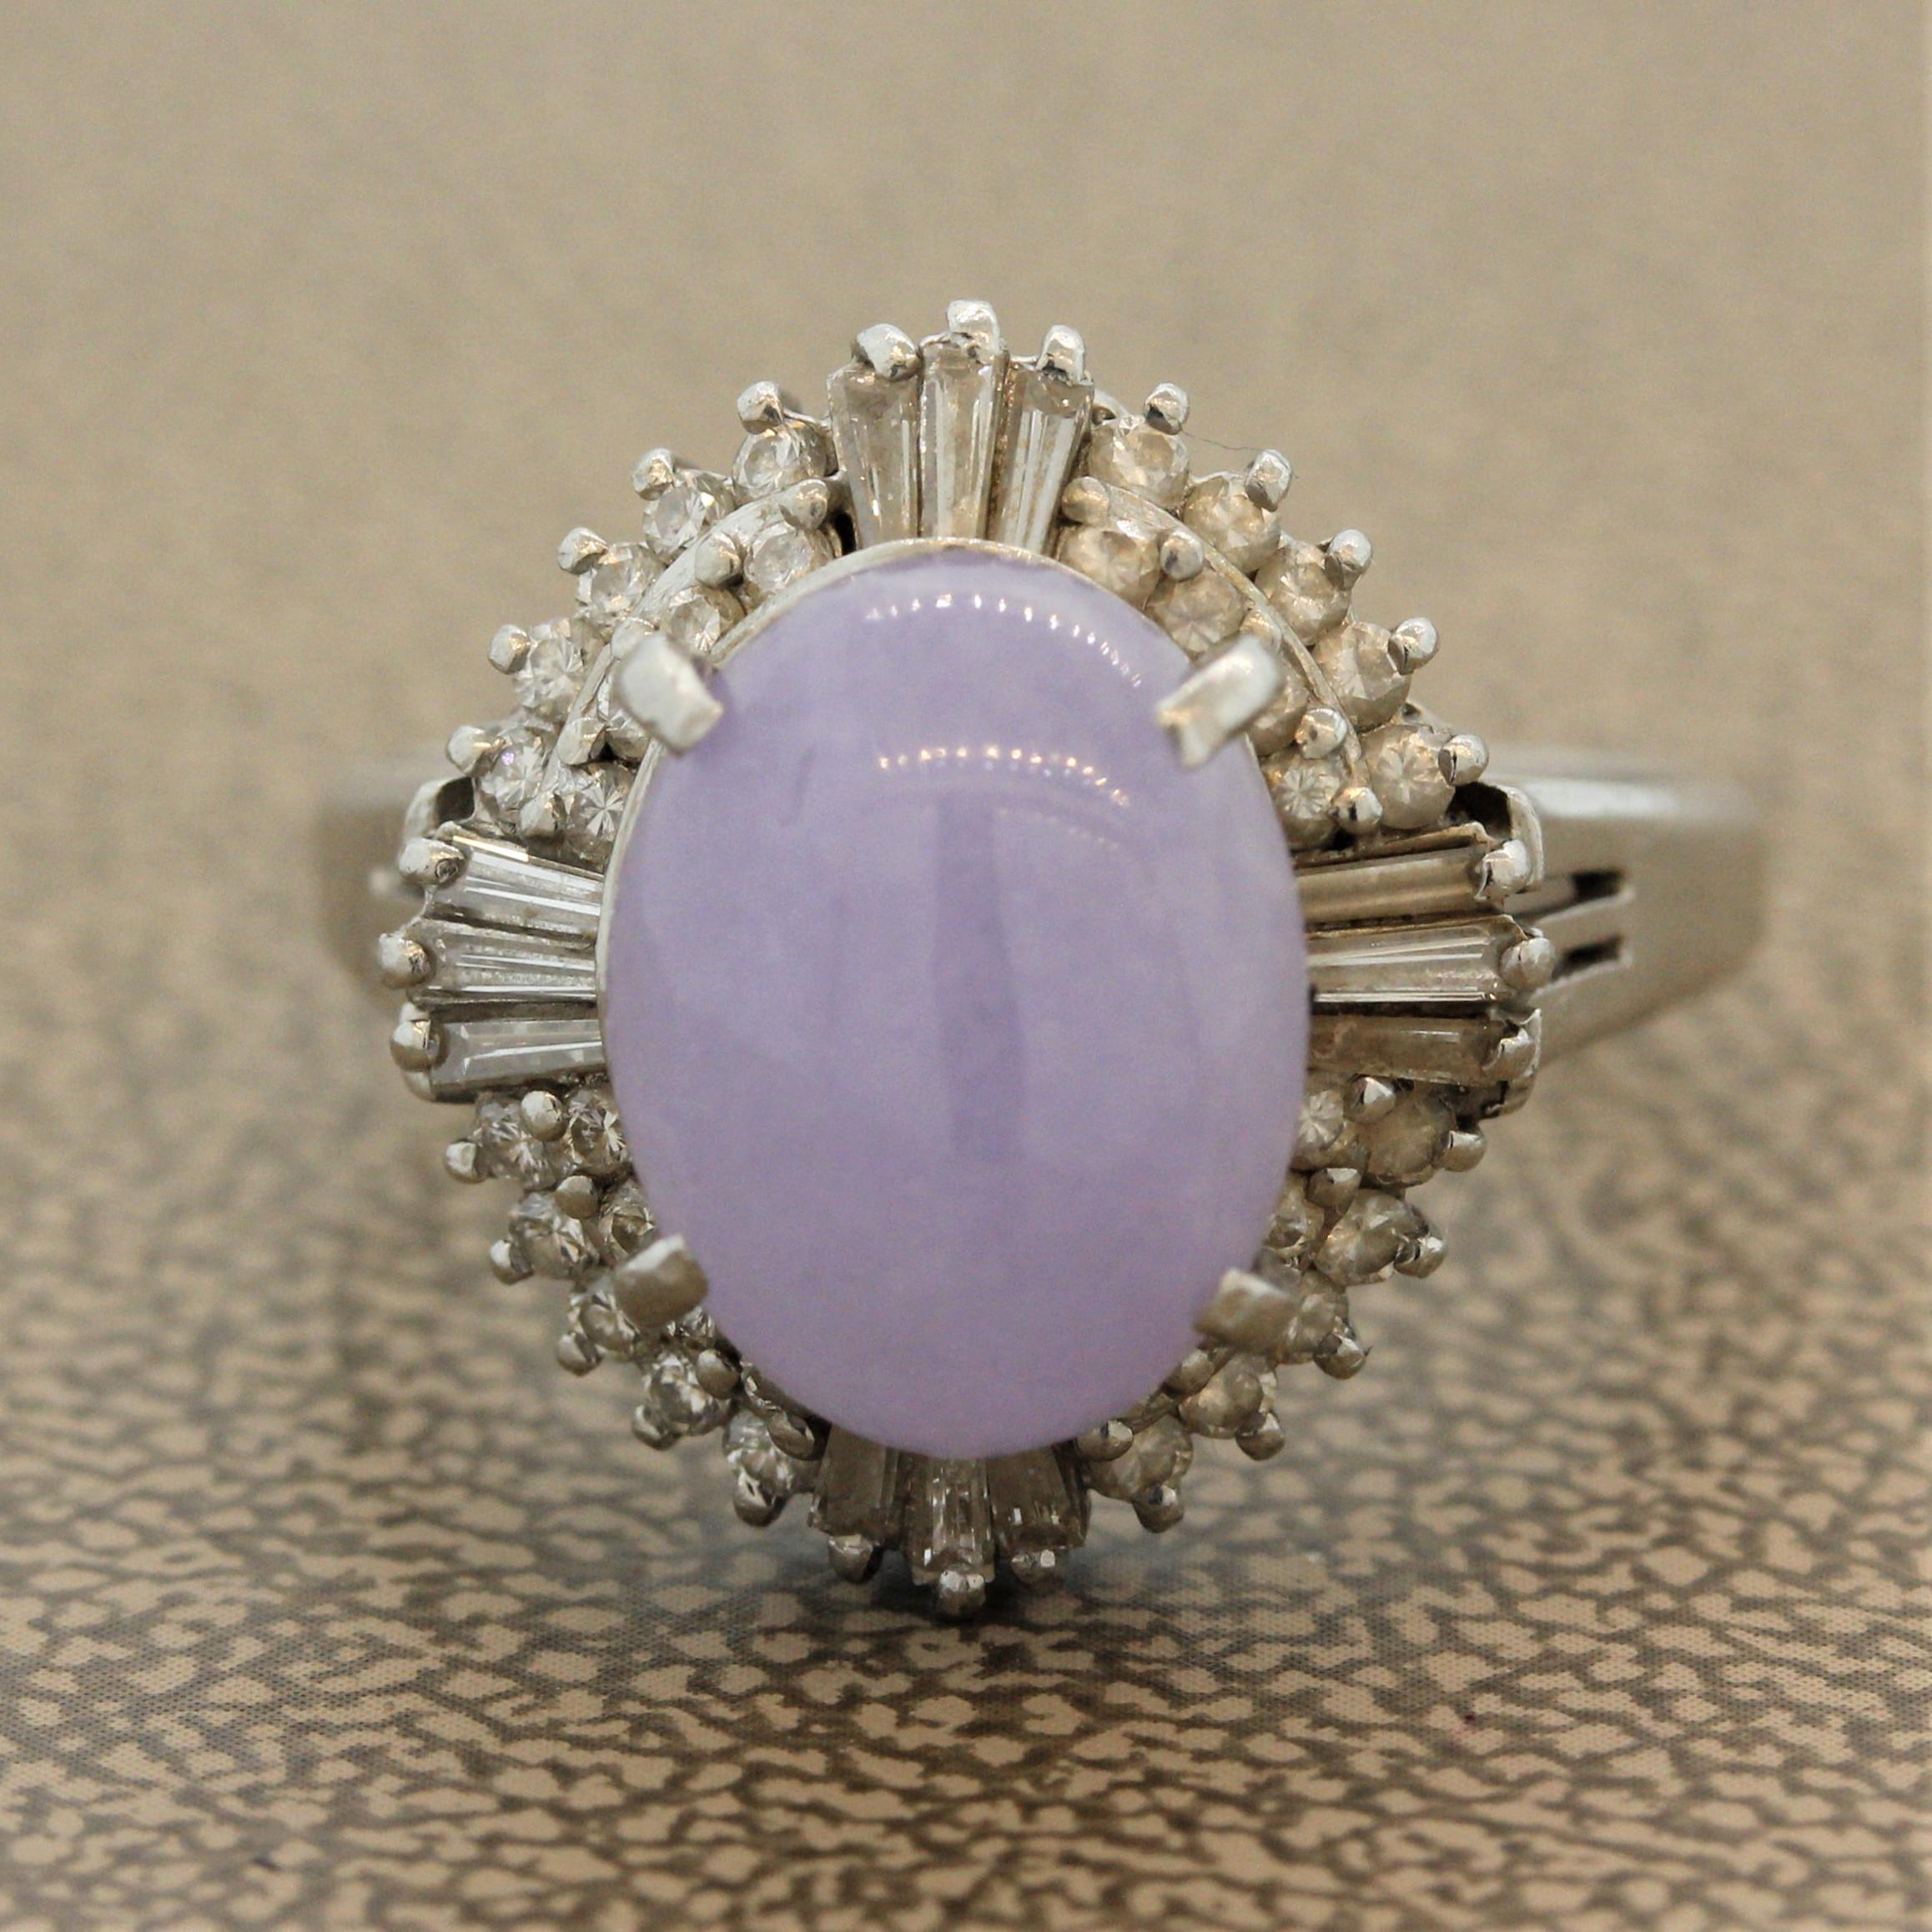 A sweet piece of natural jadeite jade takes center stage. It is a soft and velvety lavender color and weighs approximately 3.50 carats. It is surrounded by baguette and round brilliant cut diamonds weighing a total of 0.57 carats. Hand fabricated in